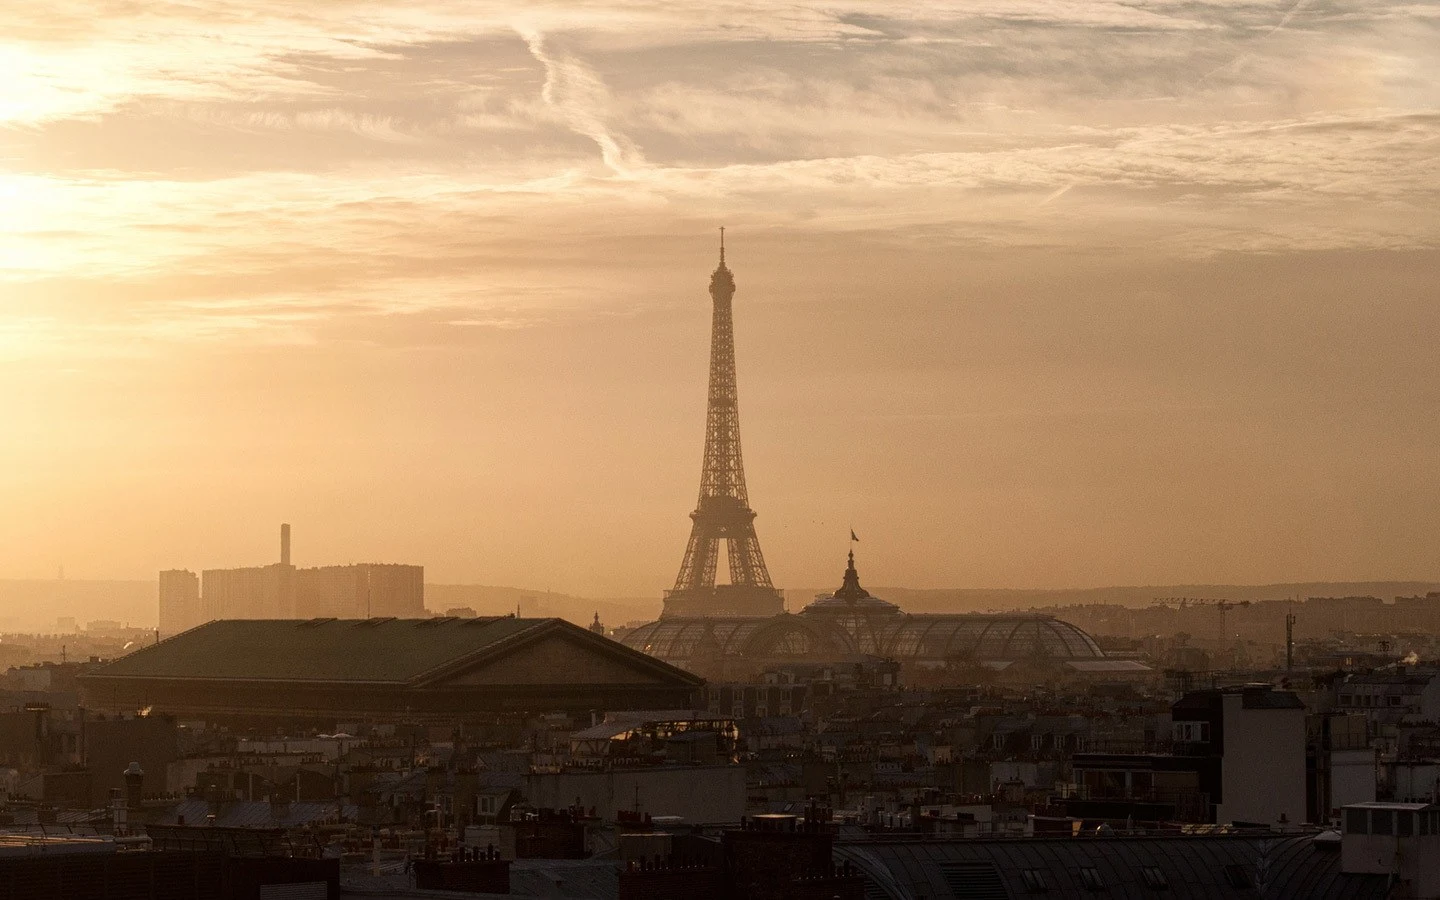 Sunset views of the Eiffel Tower from the top of Galeries Lafayette Haussmann, Paris